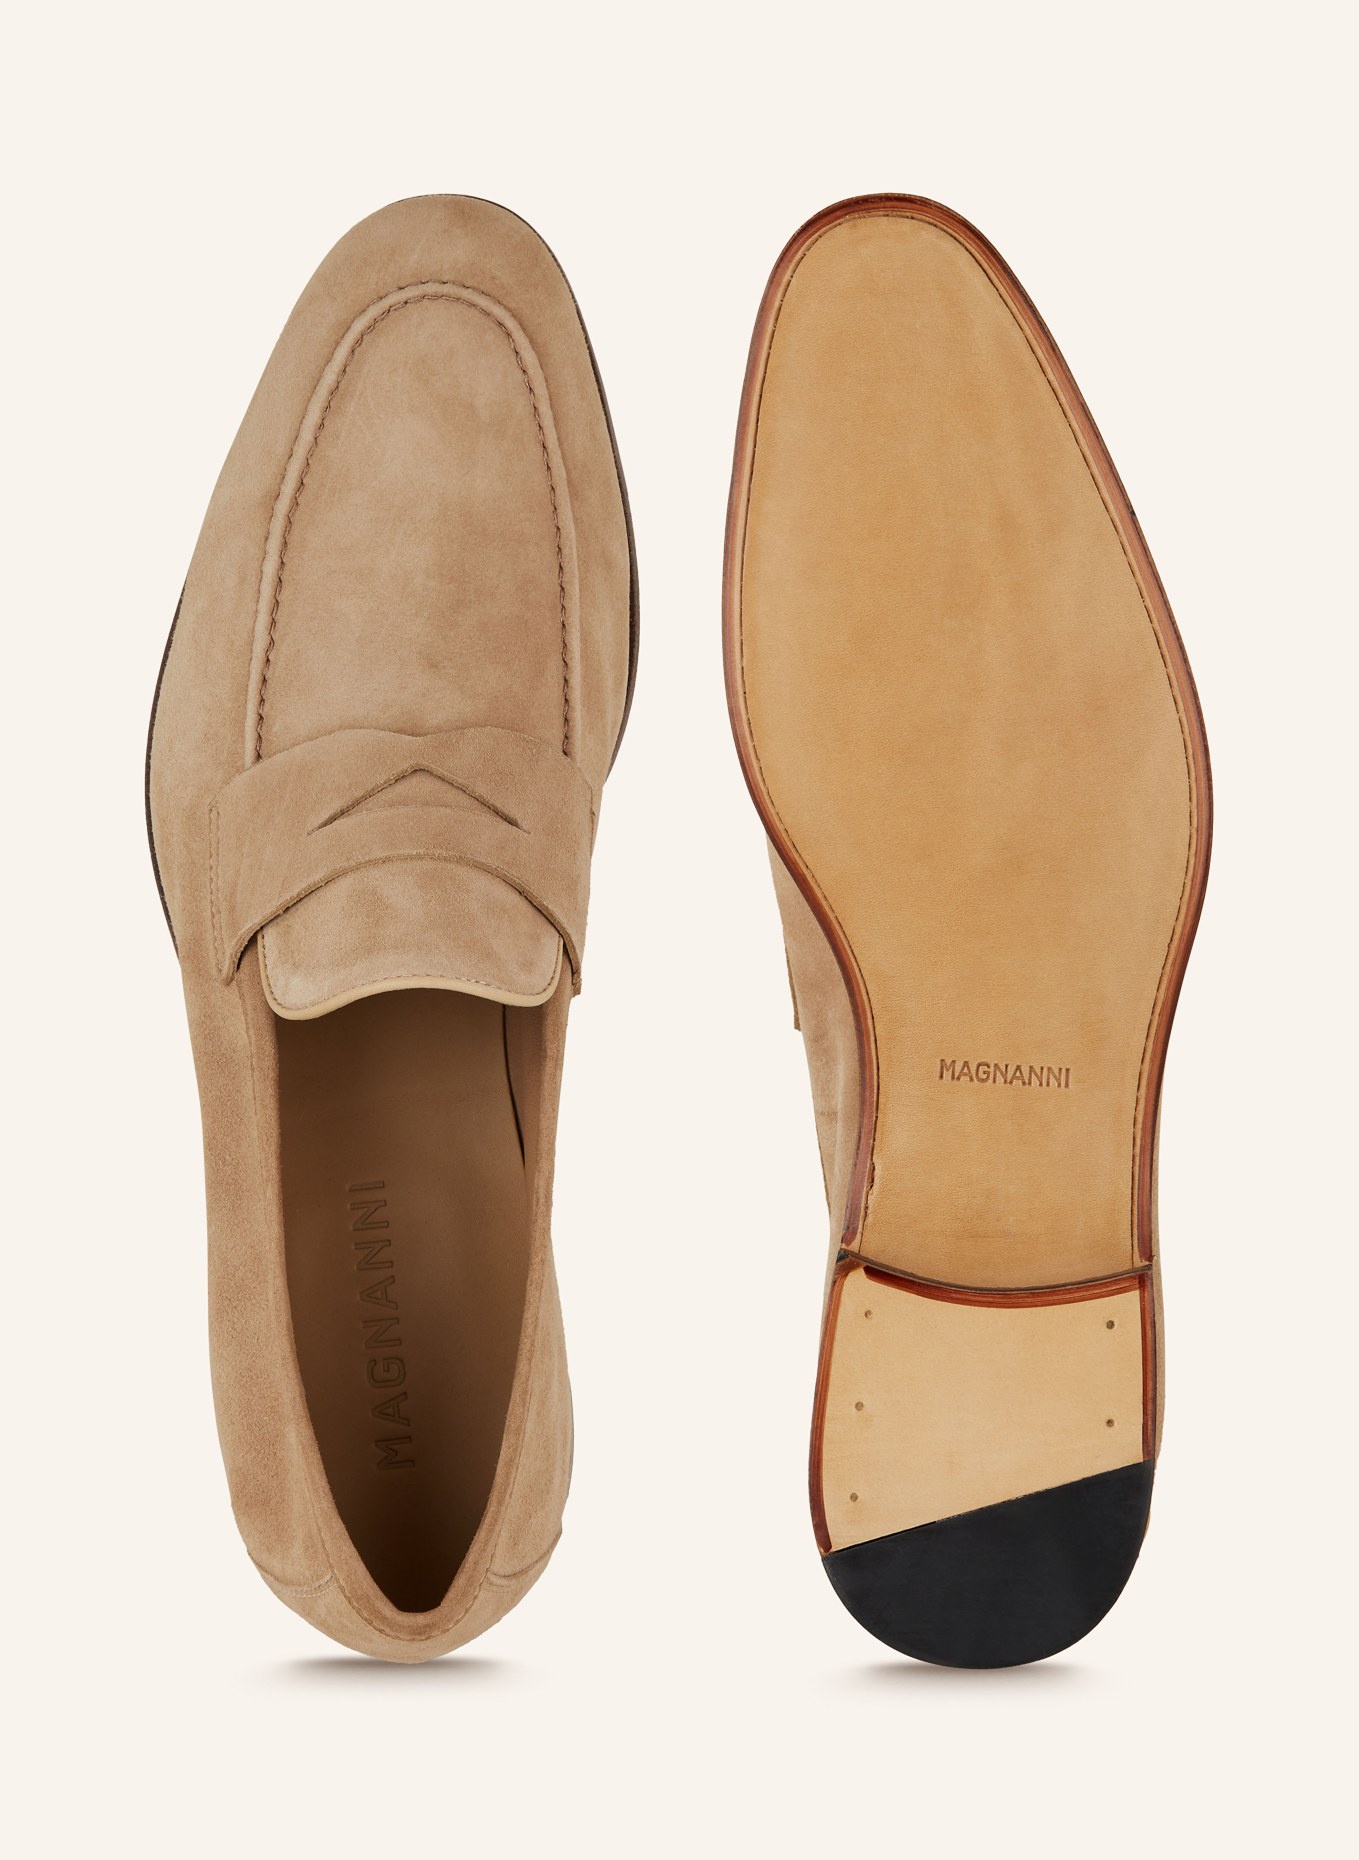 MAGNANNI Penny loafers, Color: TAUPE (Image 5)